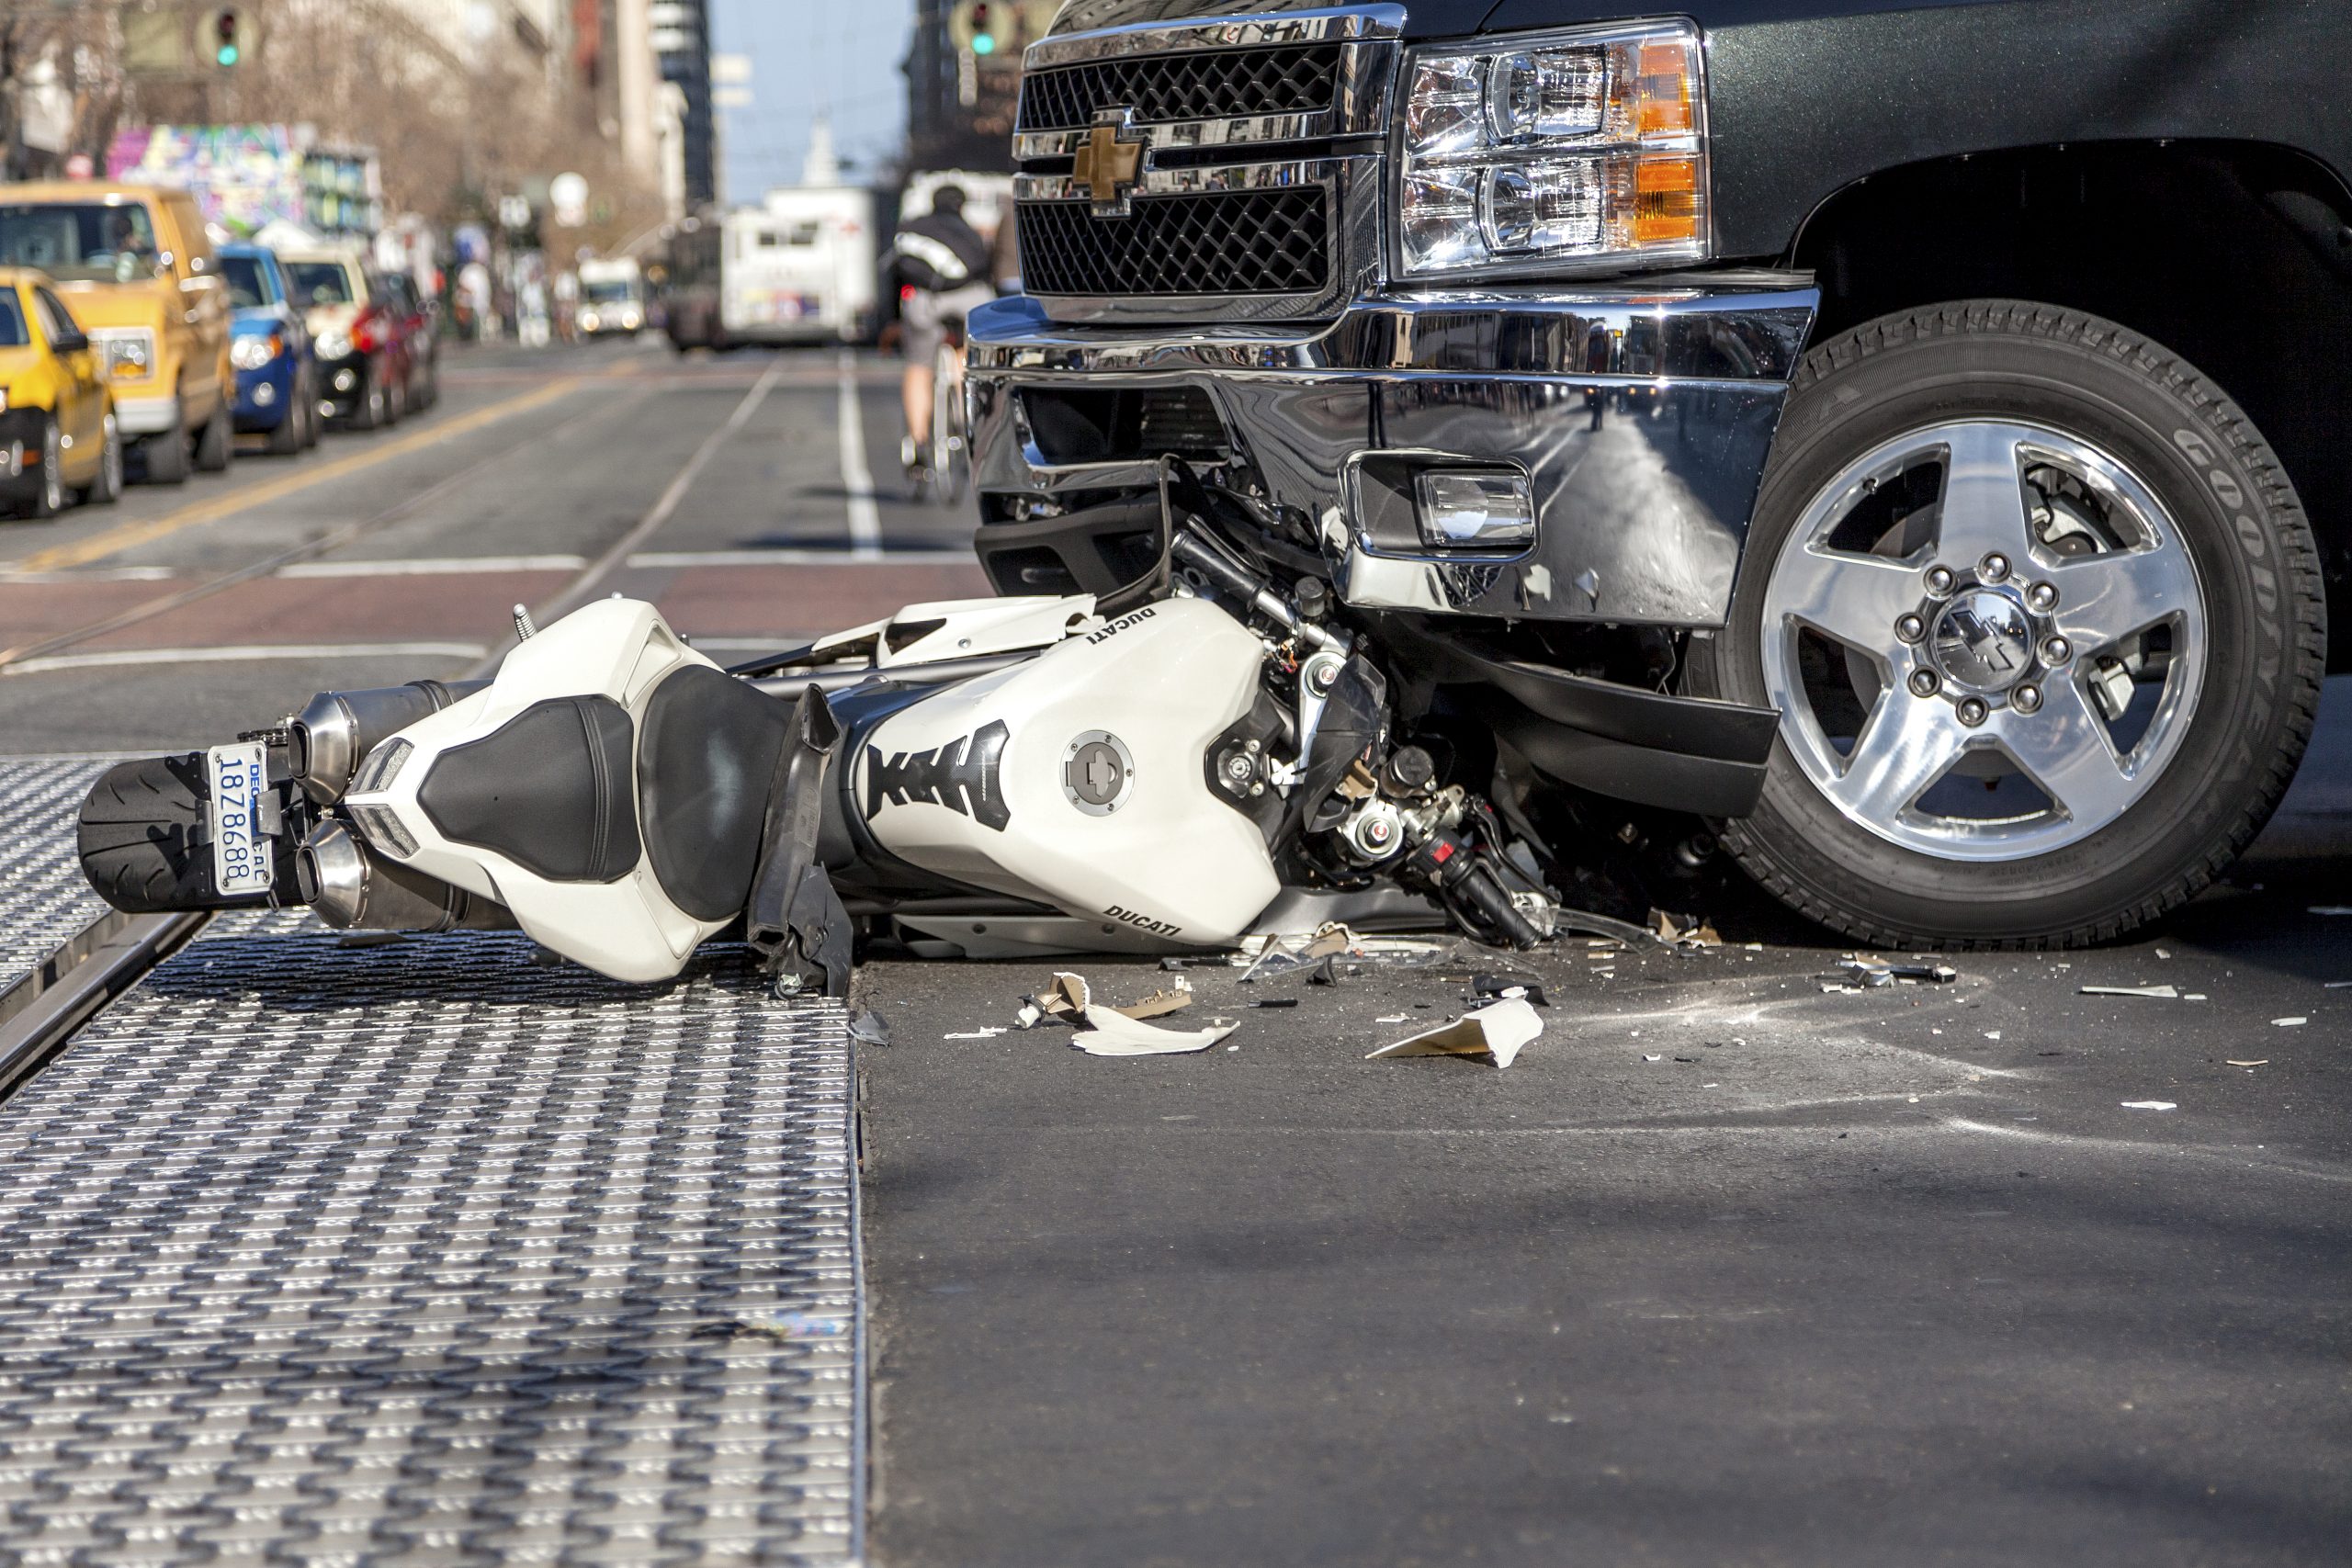 Indiana Motorcycle Accident Attorneys